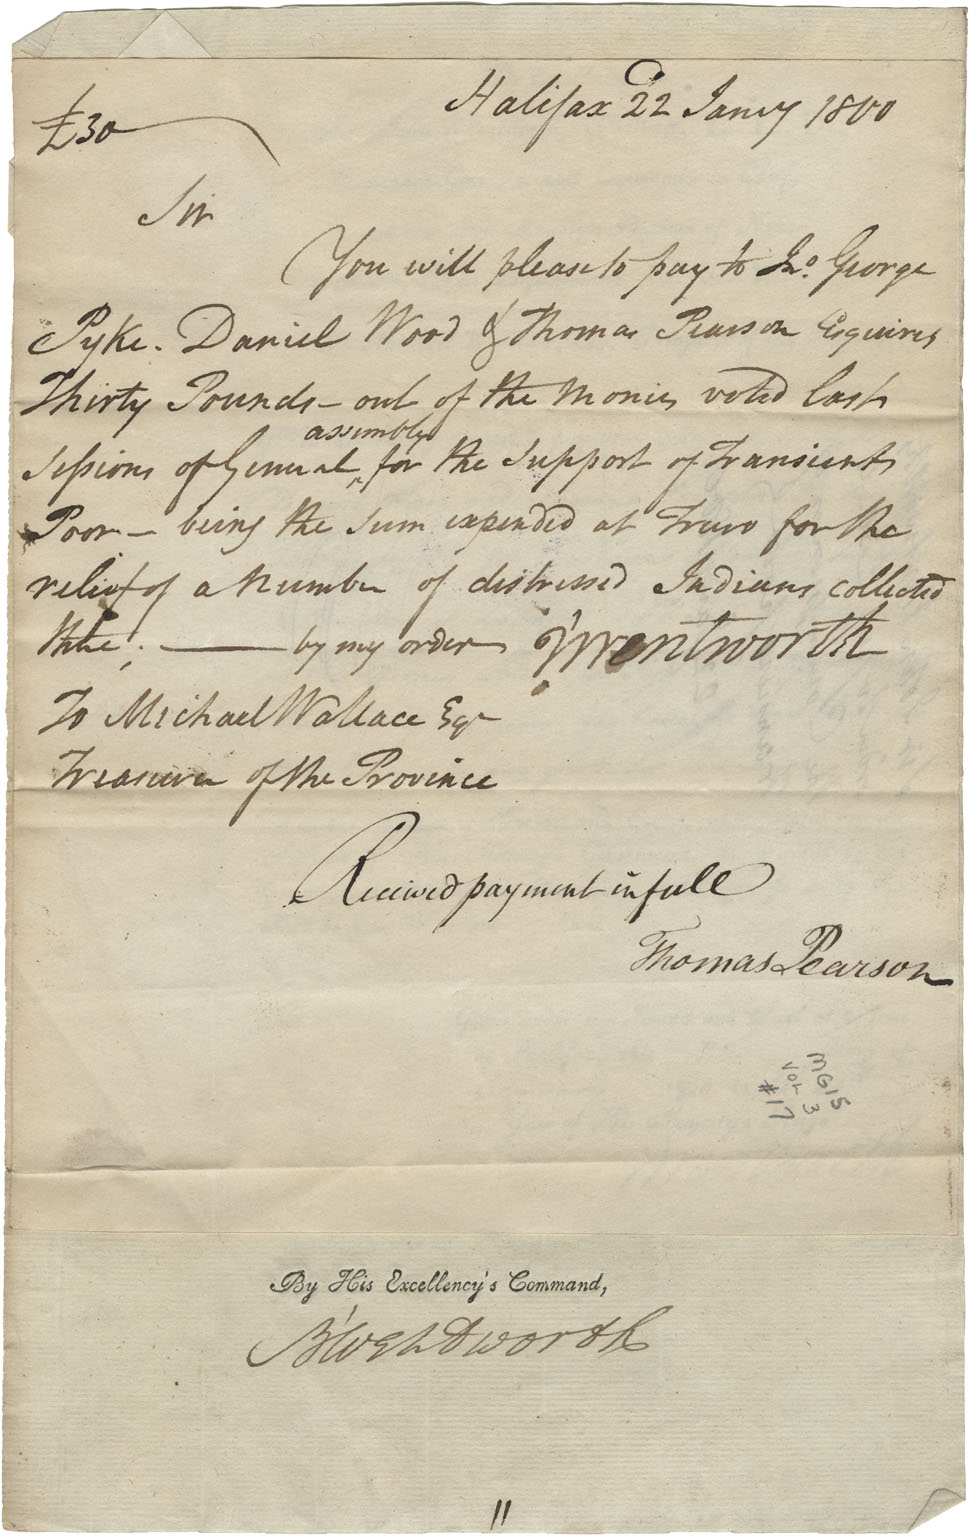 Sir John Wentworth orders Michael Wallace, Treasurer of the Province, to pay £30 to George Pyke, Daniel Wood and Thomas Pearson for relief of Truro Mi'kmaq. 